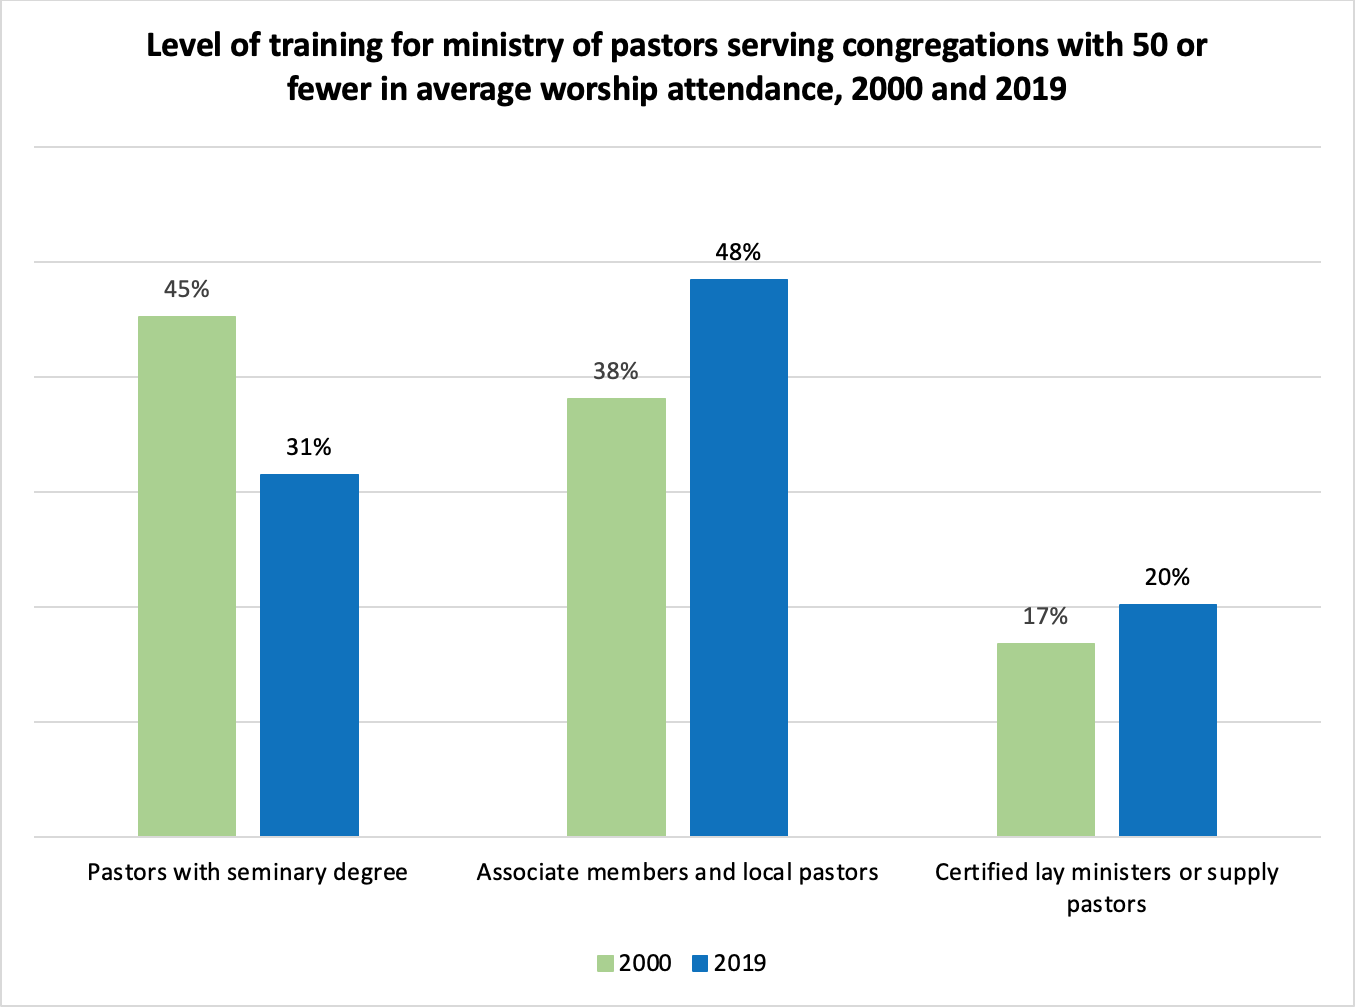 Level of training of pastors serving congregations with 50 or fewer in average worship attendance from 2000 to 2019